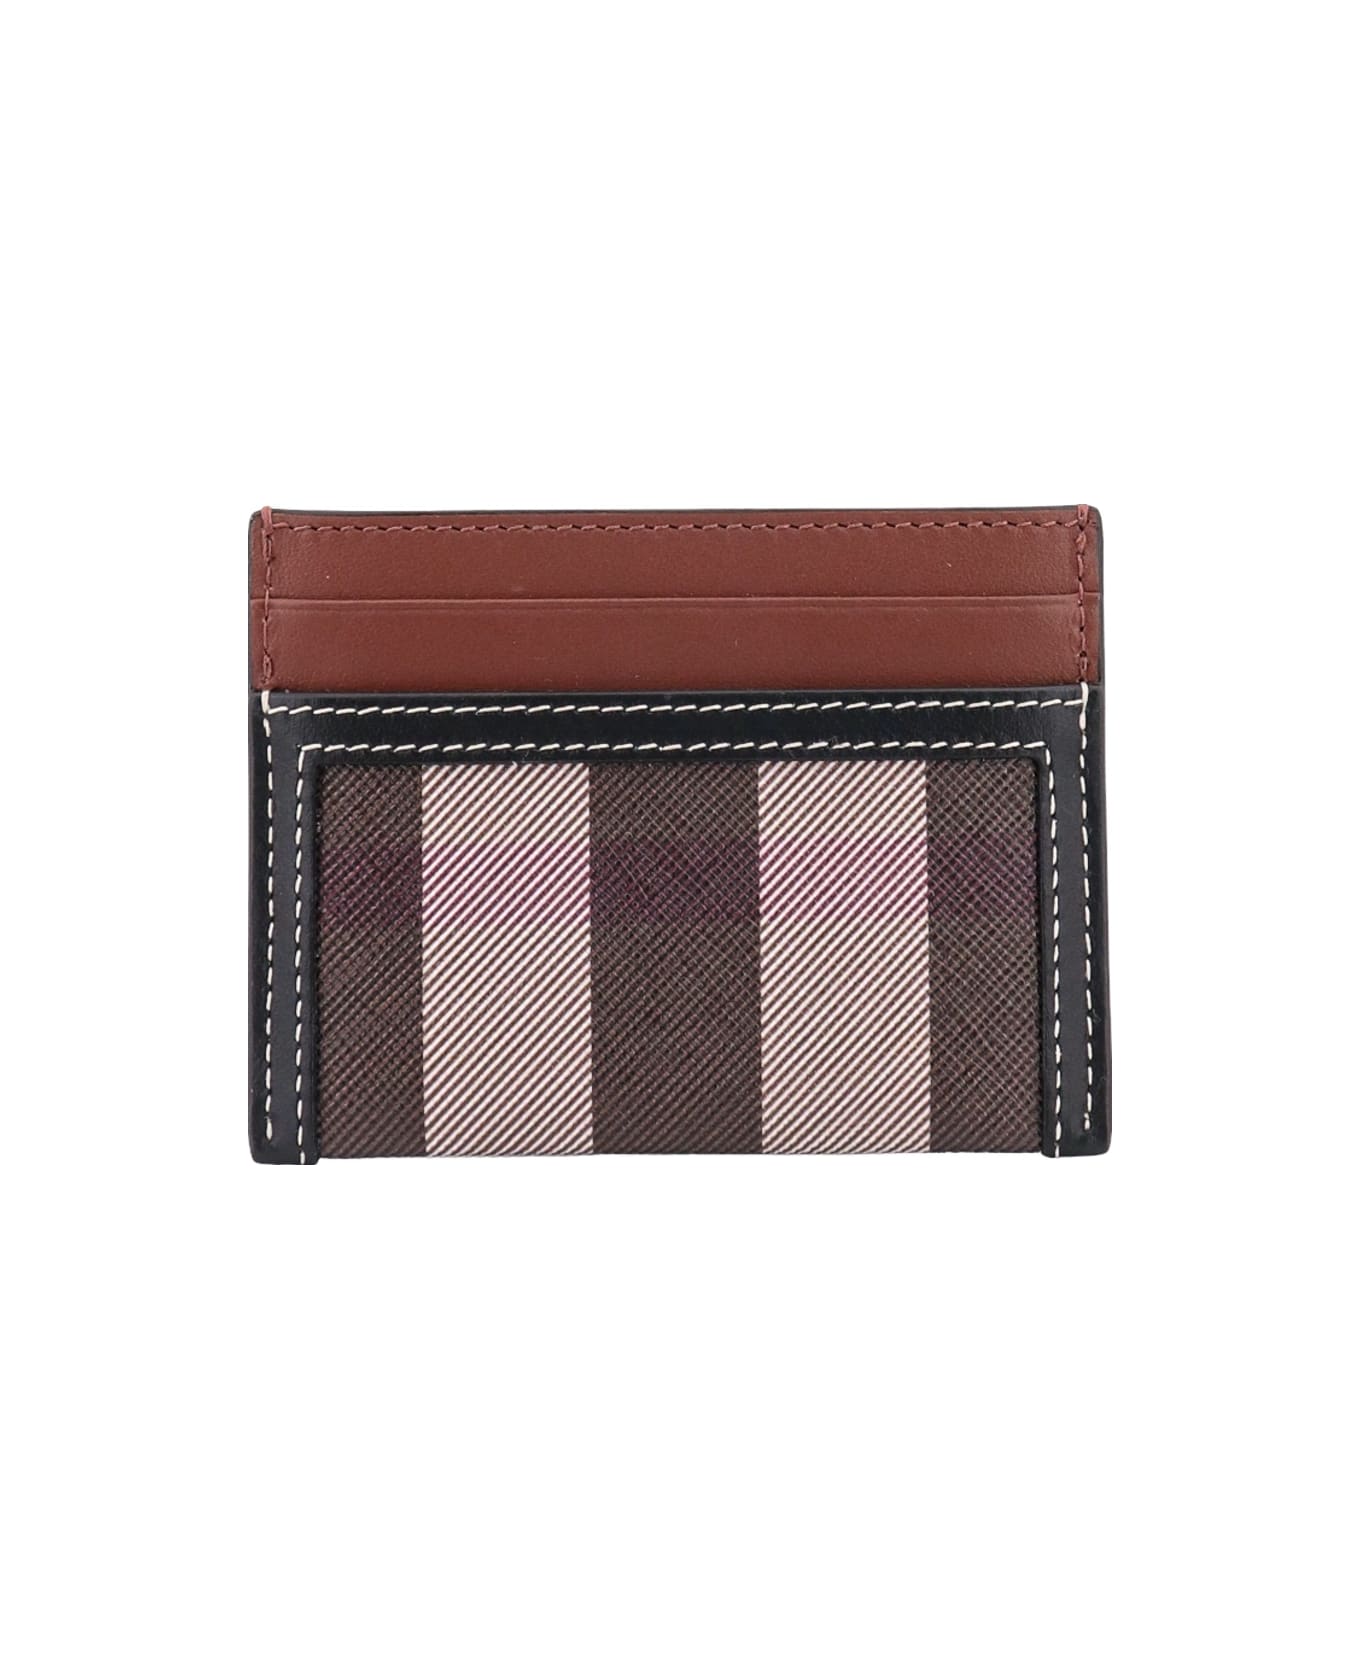 Burberry Card Holder - Brown